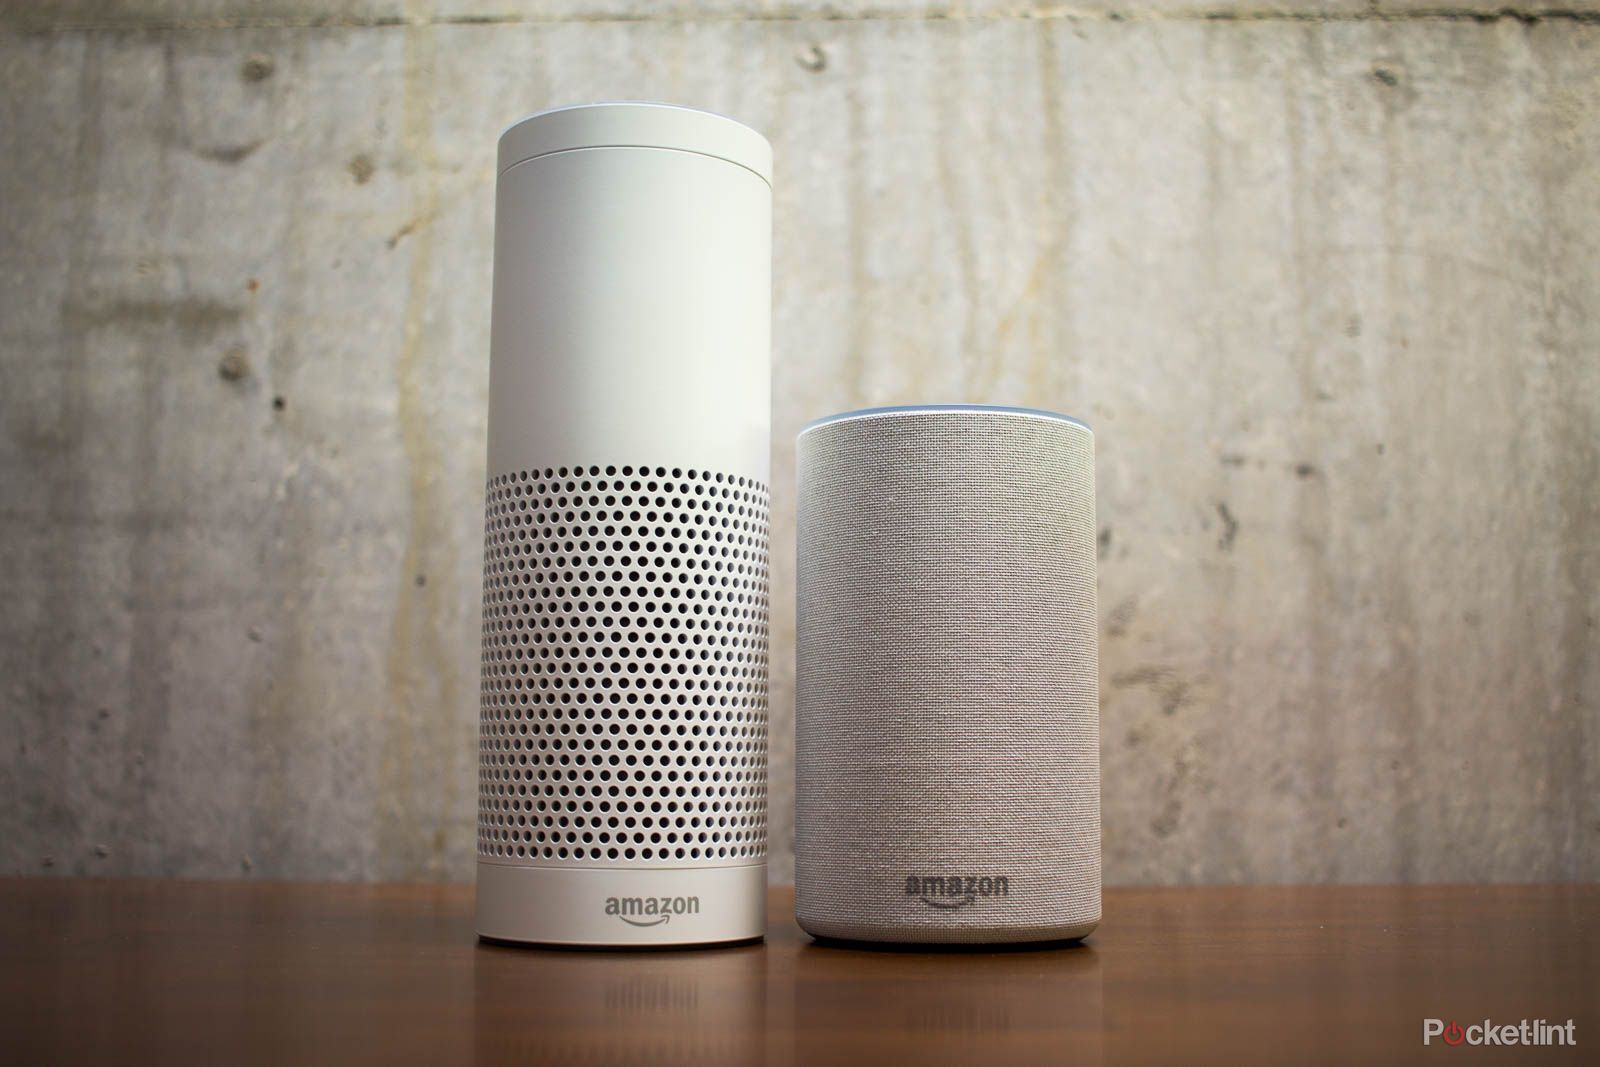 Police called to break up Amazon Alexa’s very own self-controlled party image 1